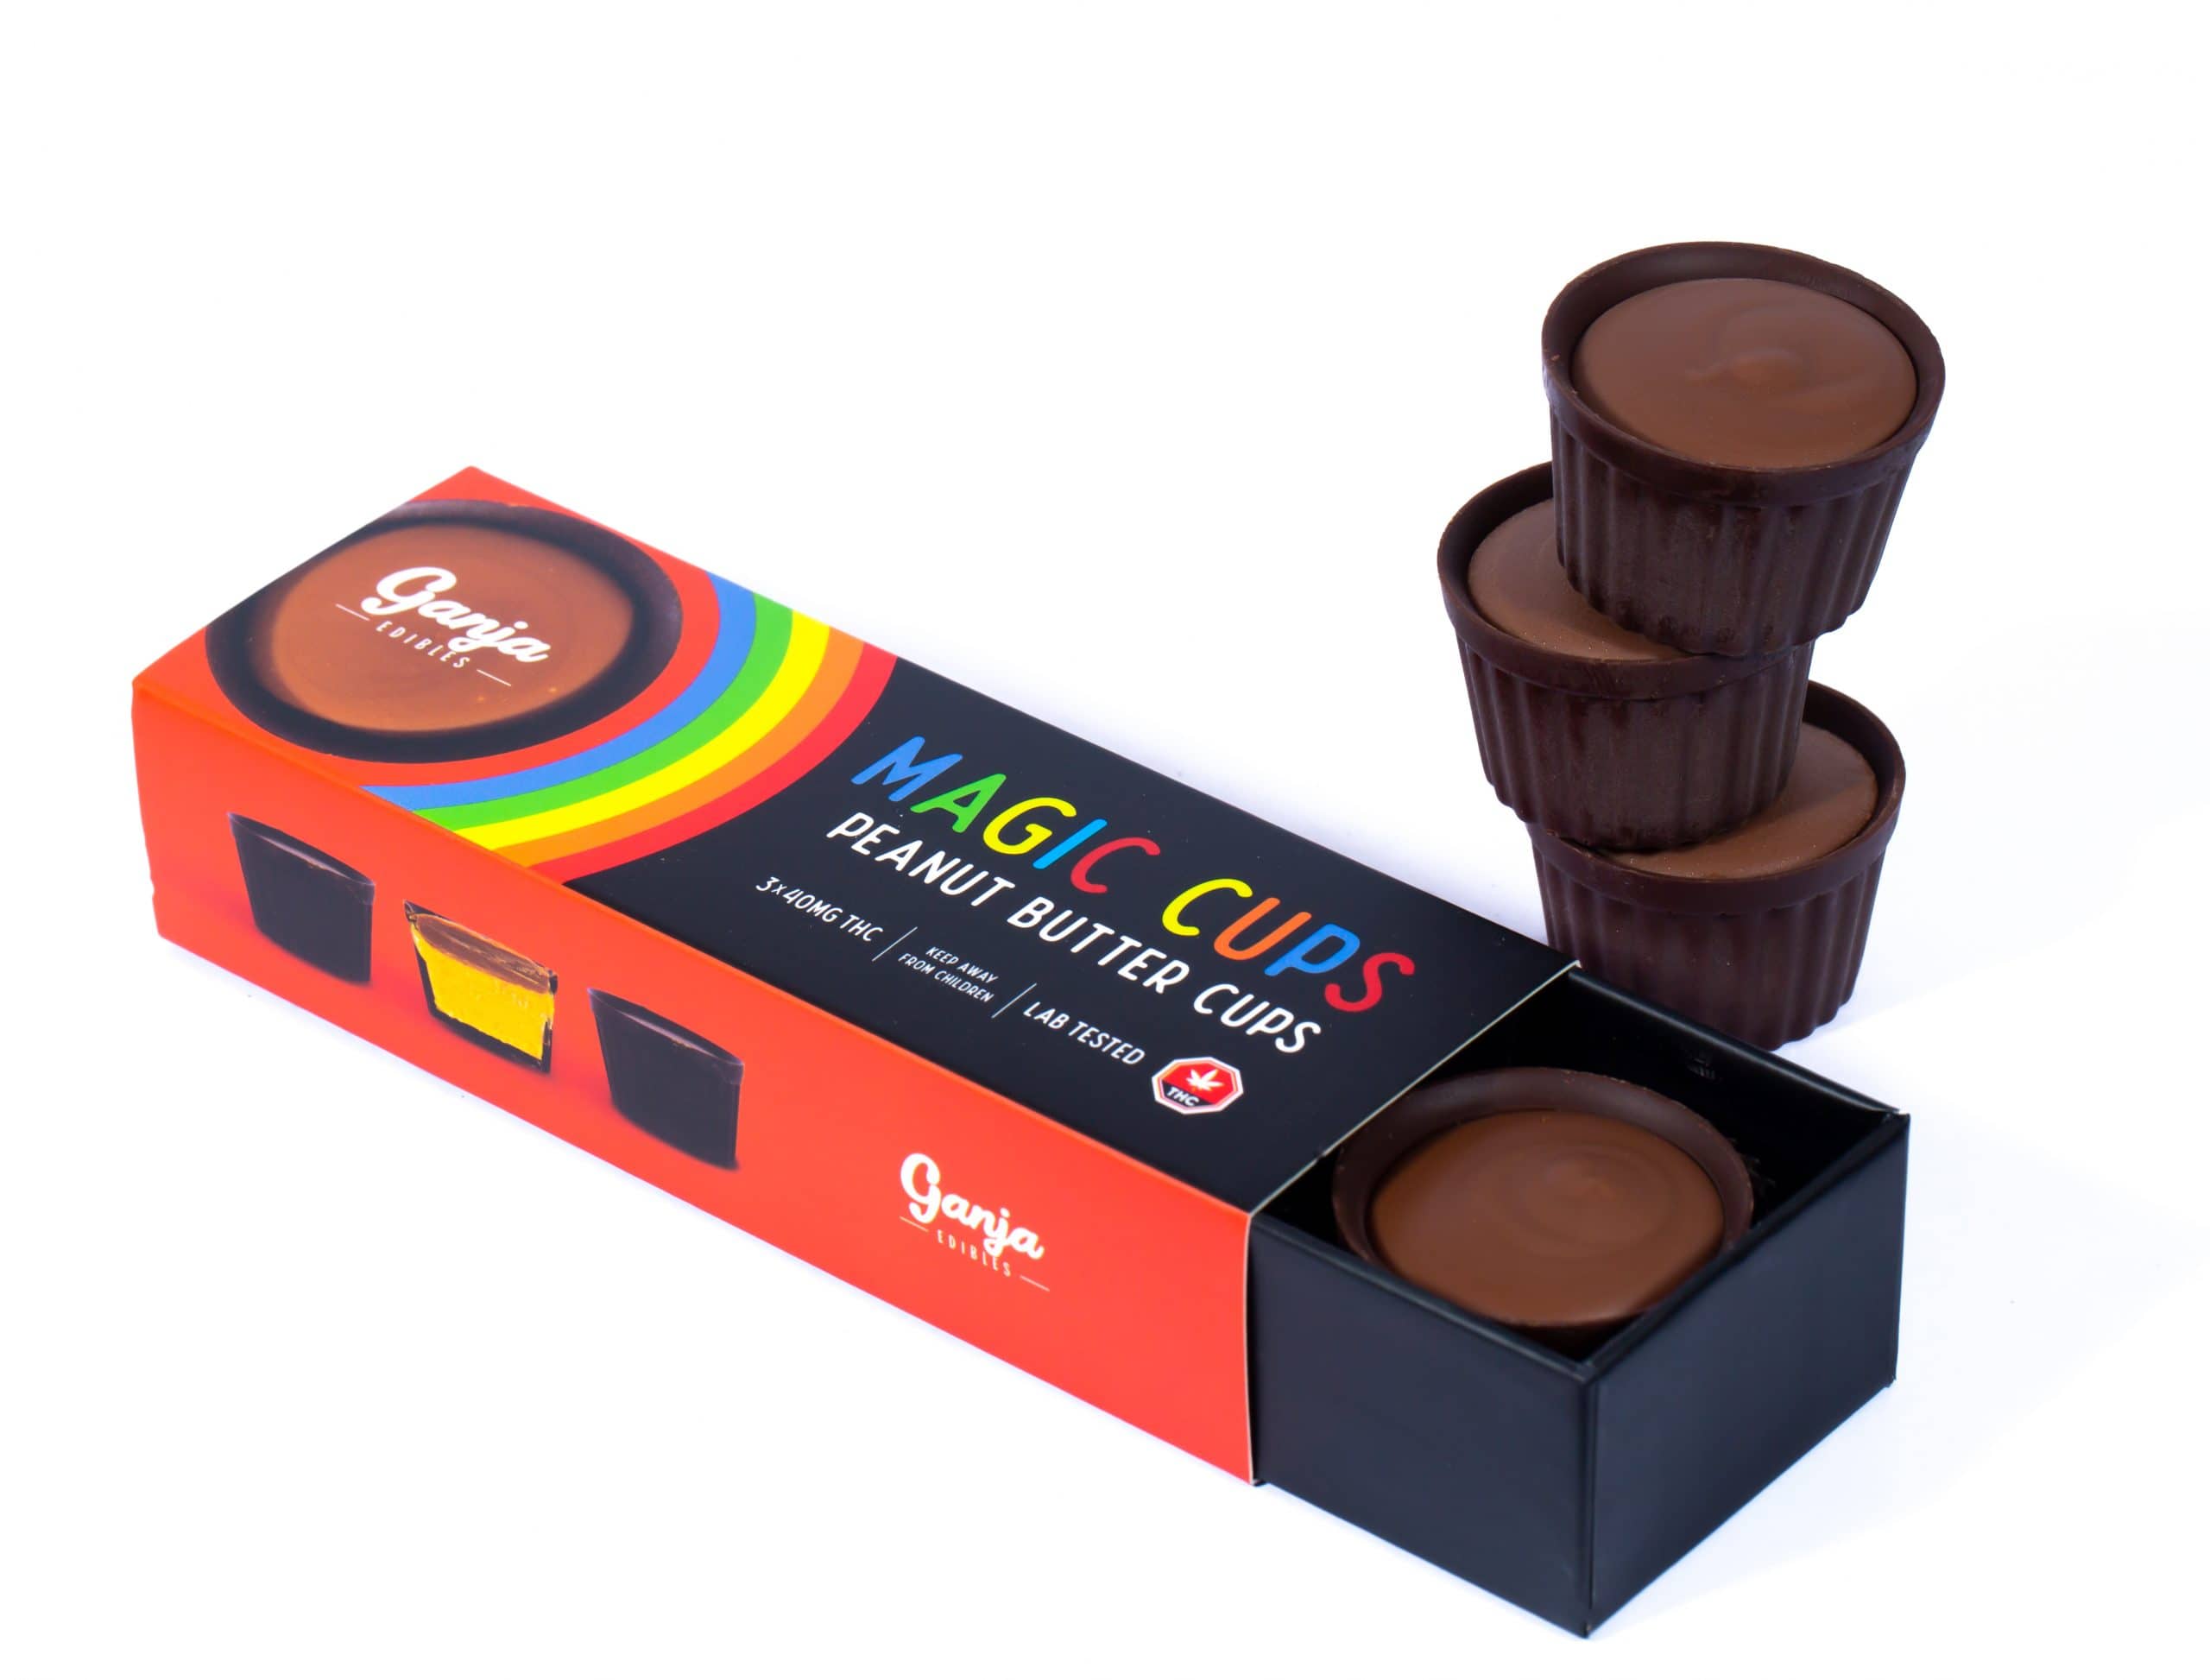 Ganja Edibles Peanut Butter Cup 3x40 (120mg THC) Weed of Doobdasher